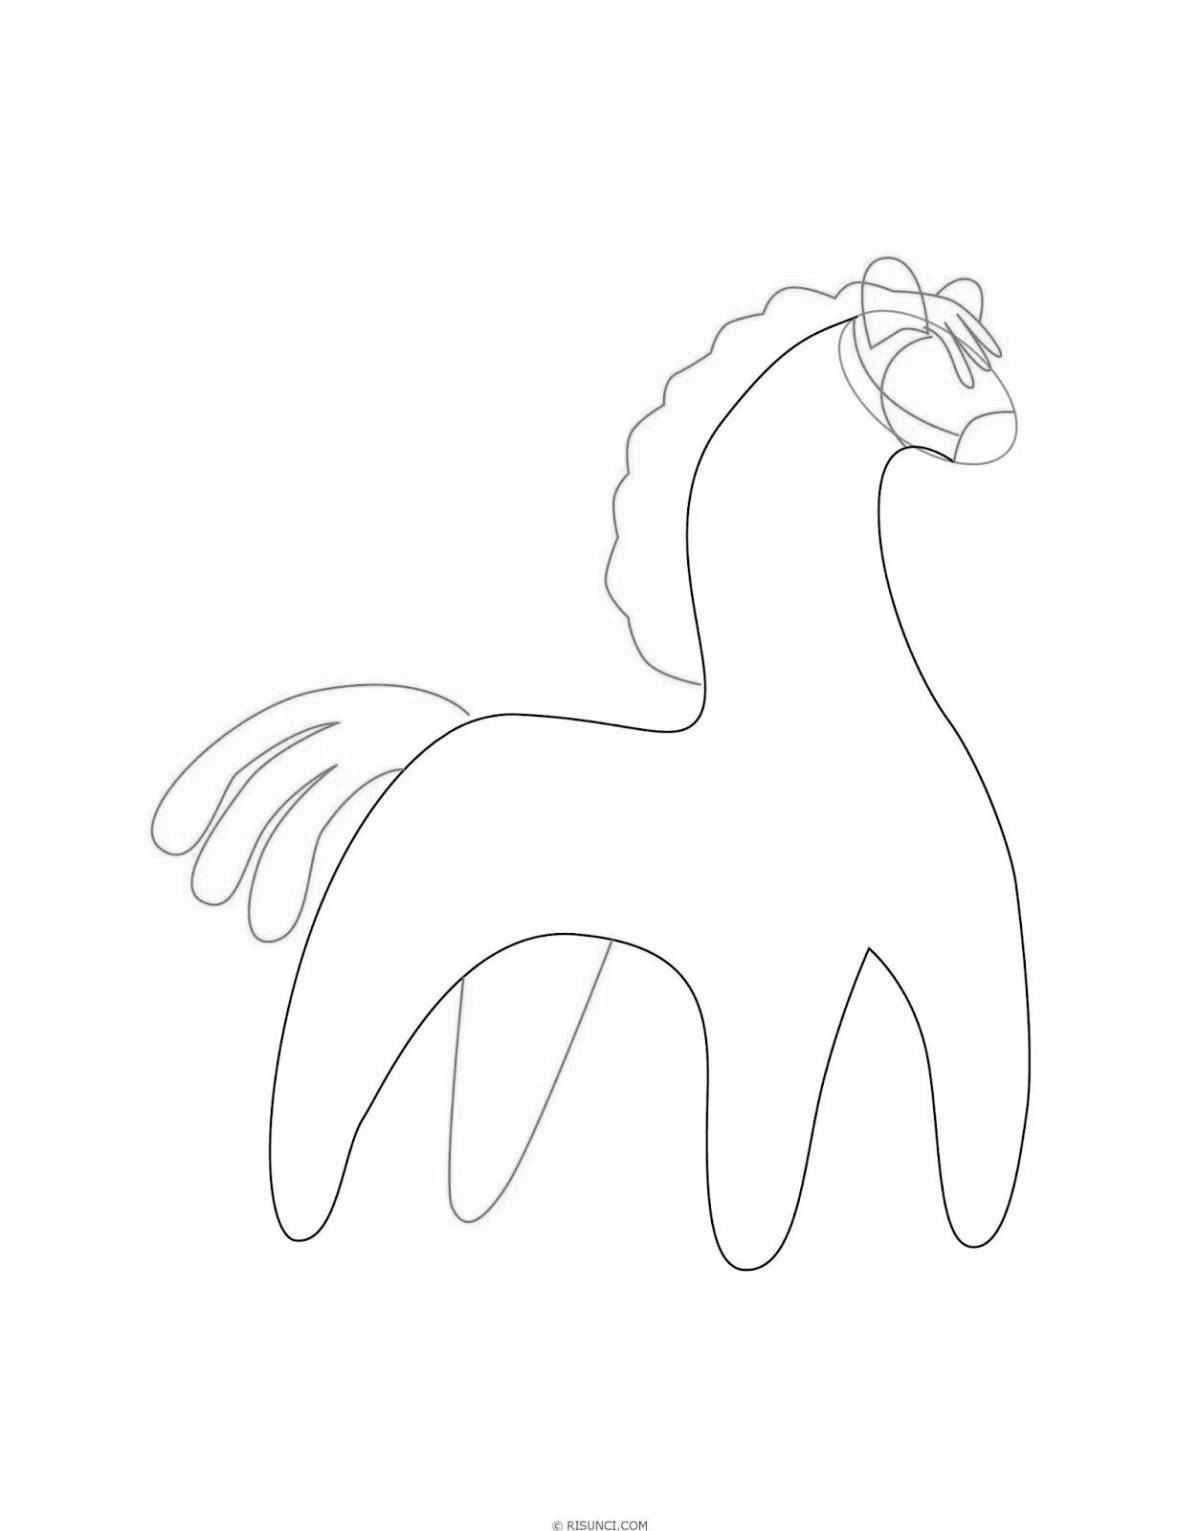 Coloring page charming Gzhel horse